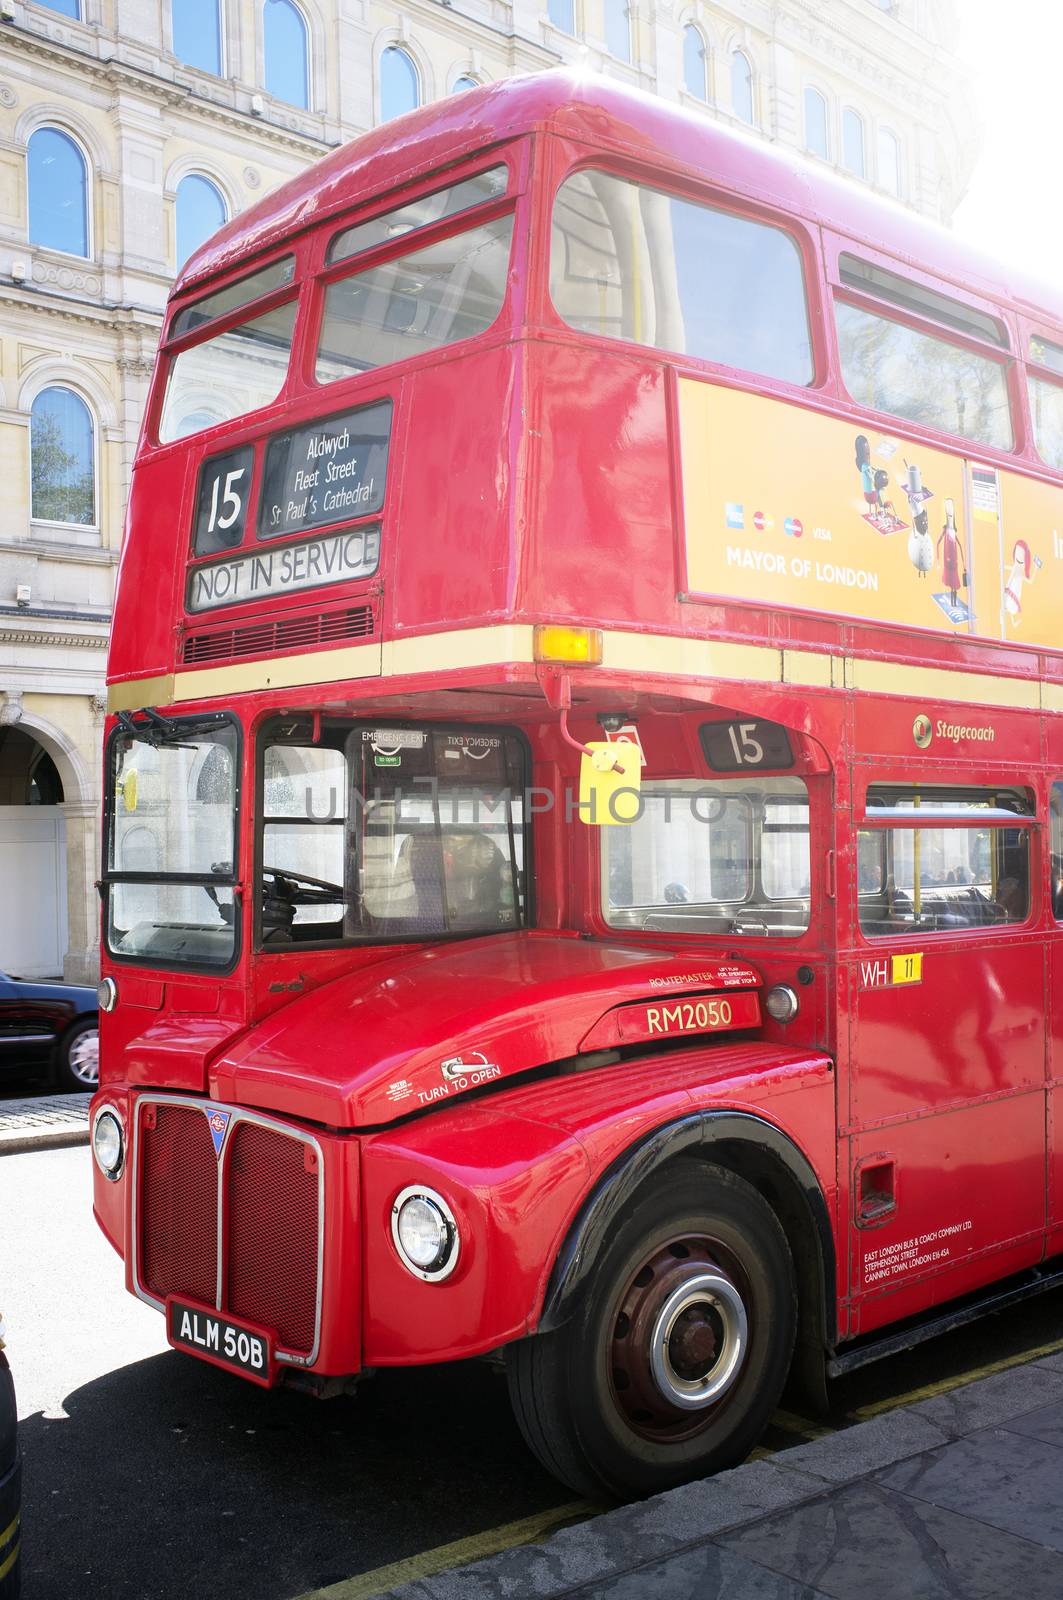 Routemaster by Stocksnapper